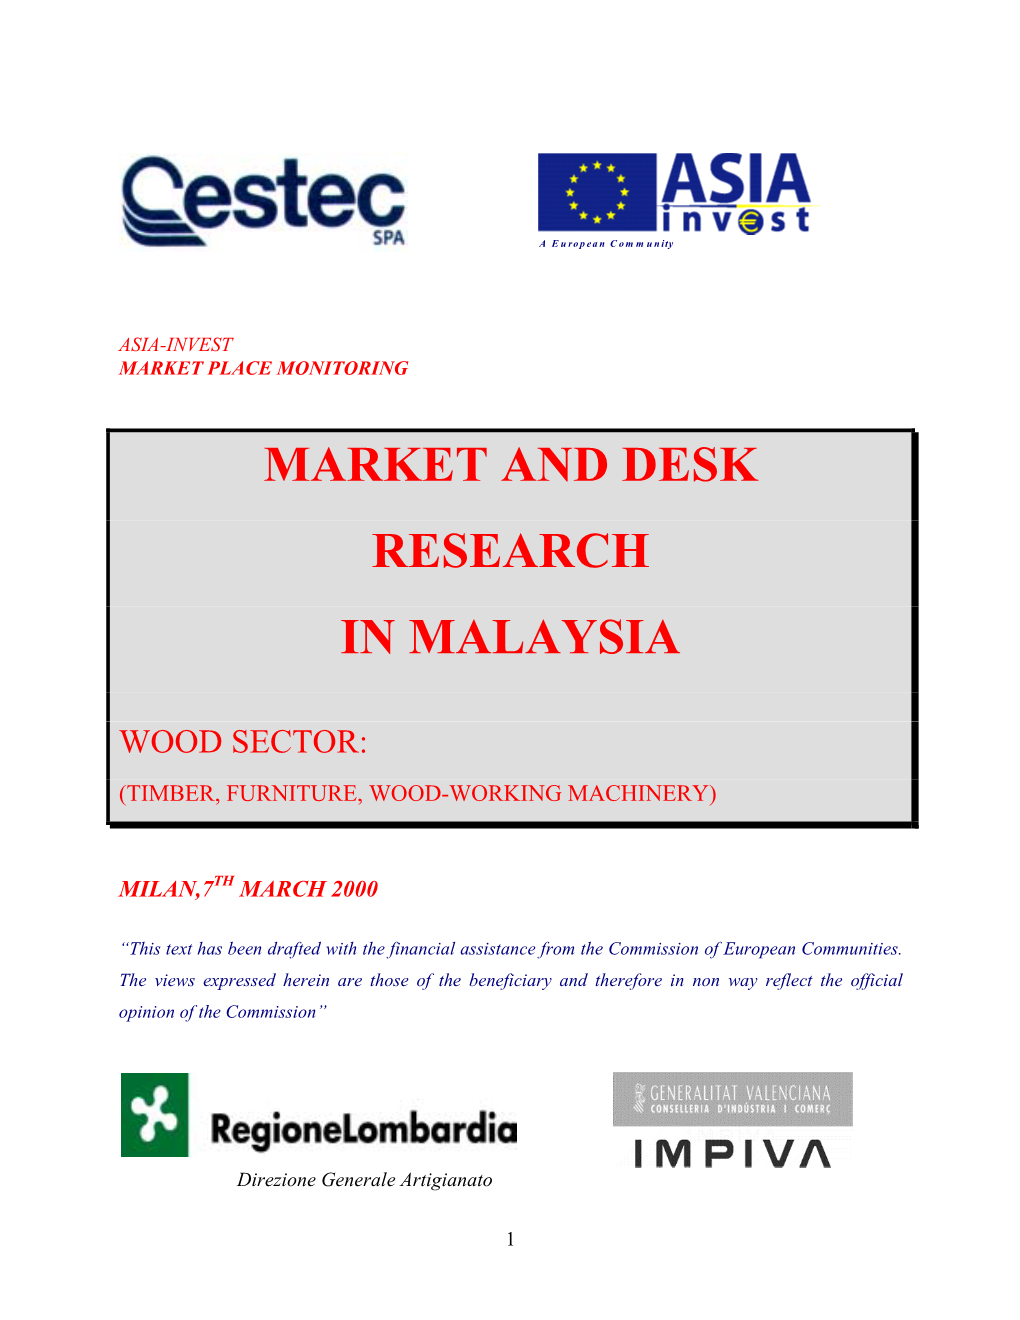 Market and Desk Research in Malaysia